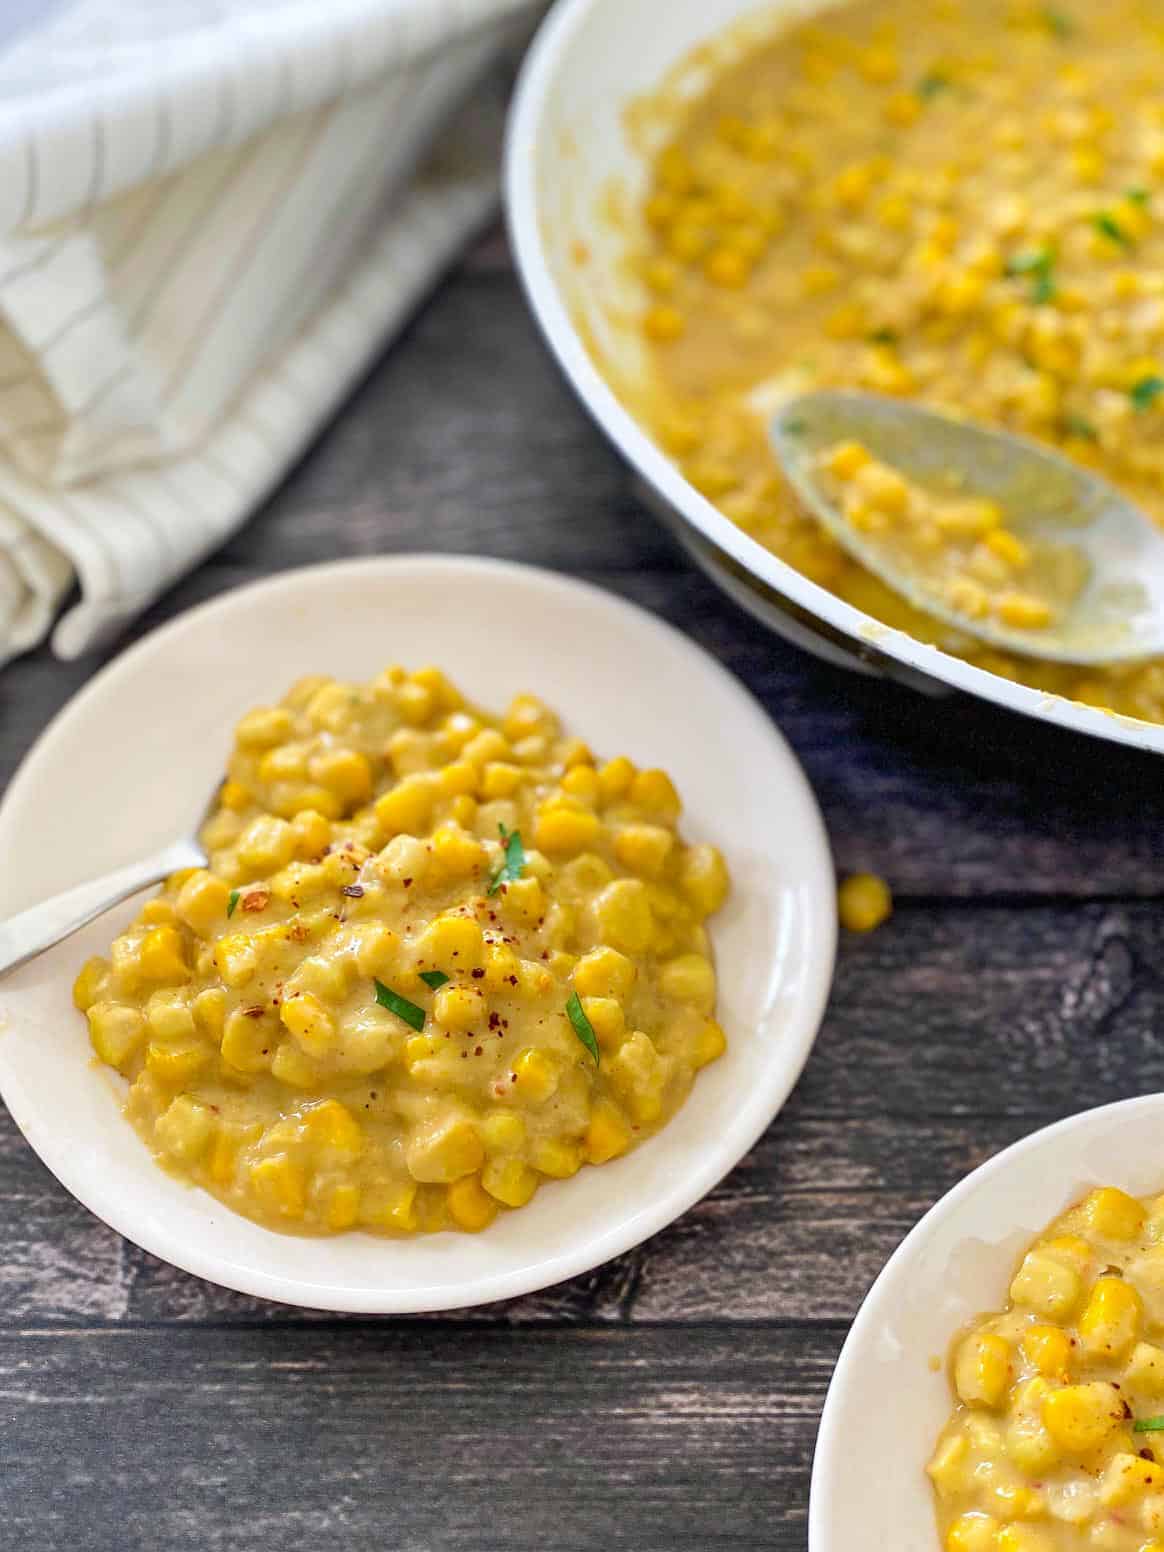 Creamed corn in white dish with spoon on the side and parsley garnish.